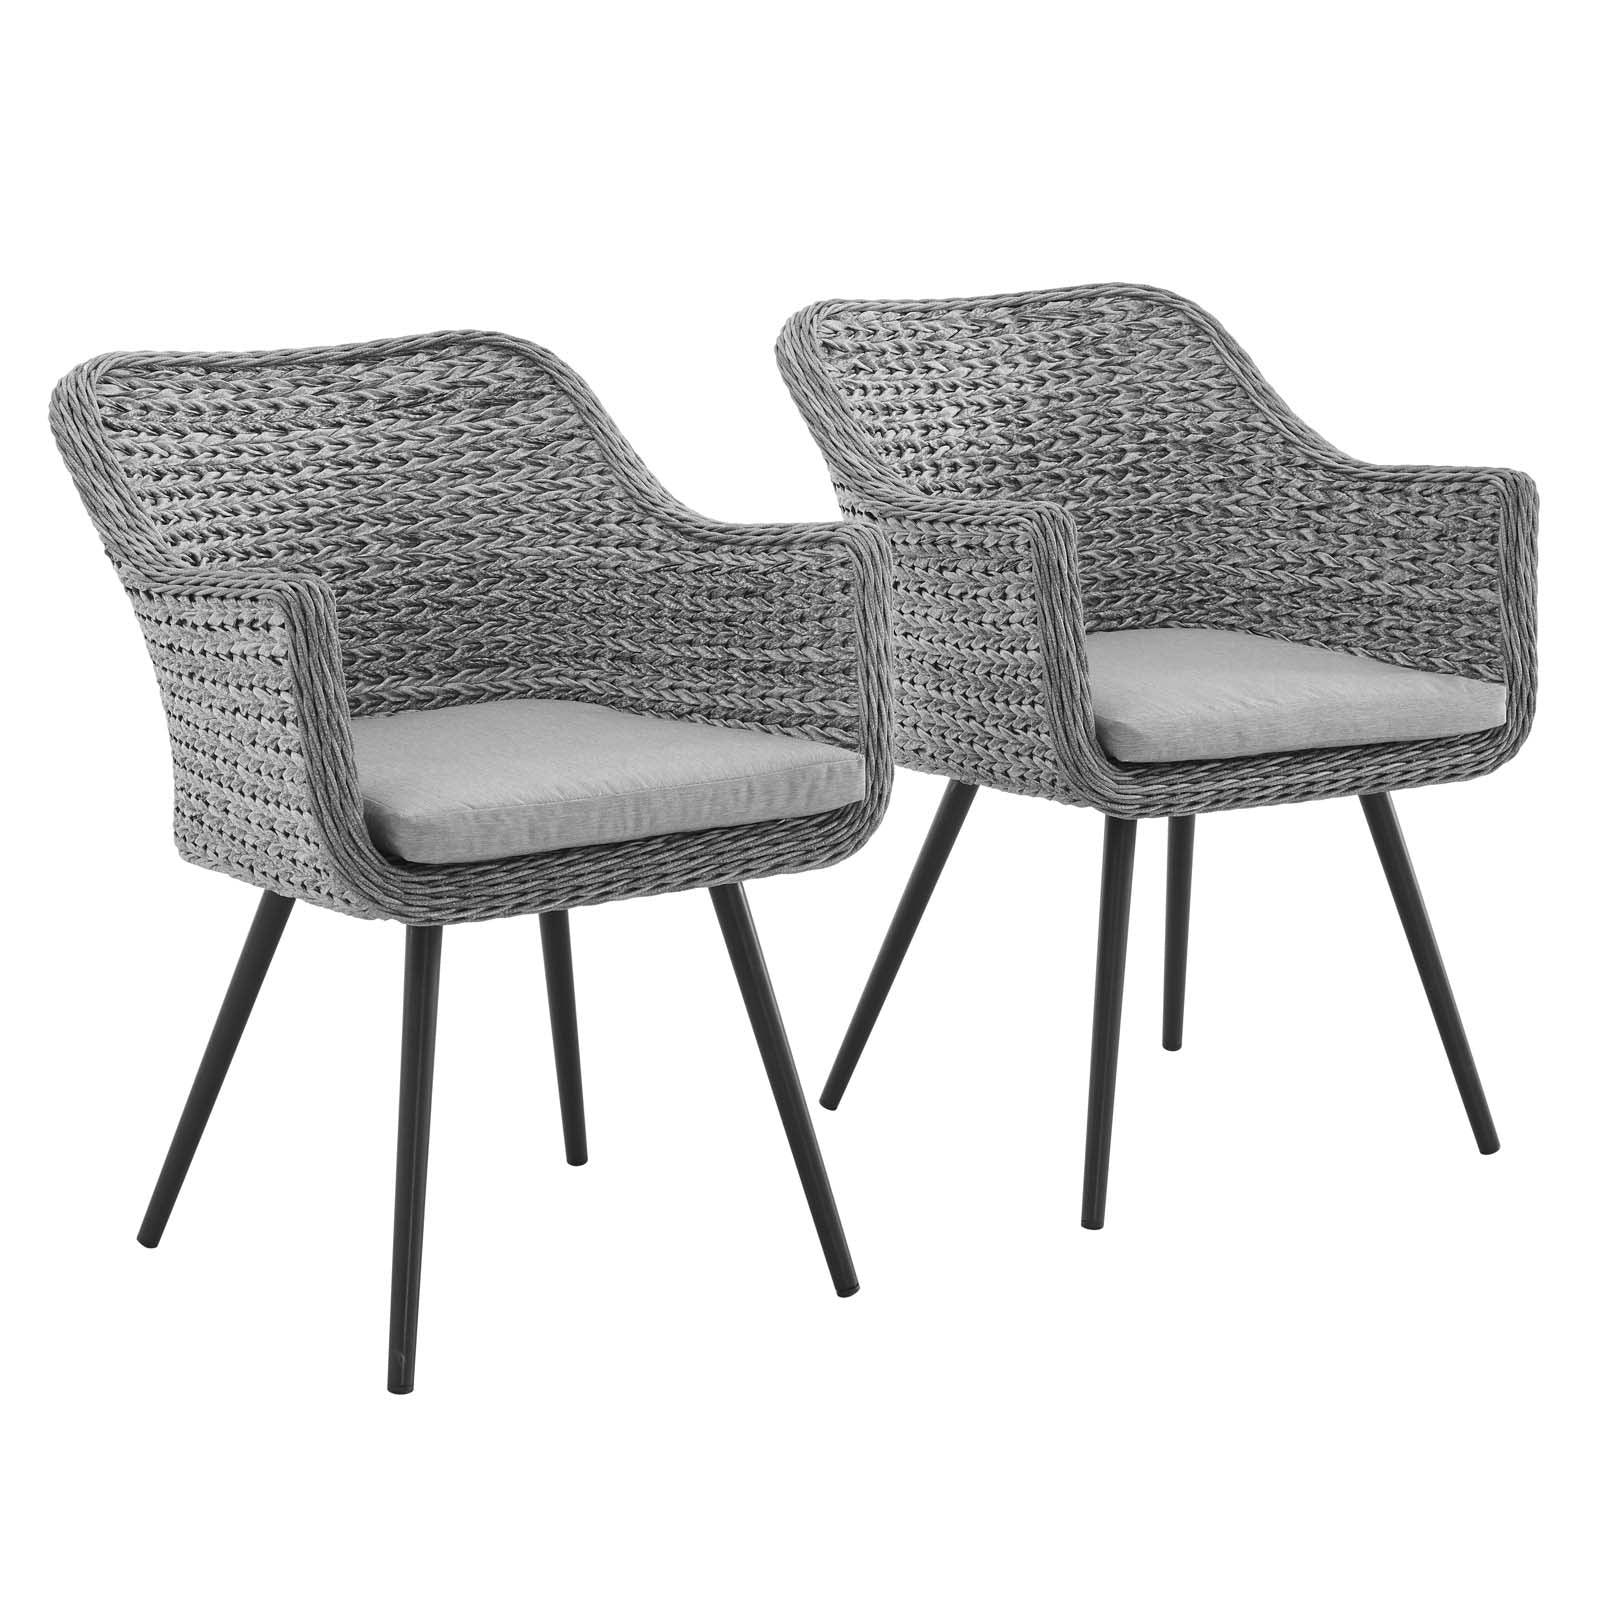 Modway Endeavor Dining Armchair Outdoor Patio Wicker Rattan Set of 2 FredCo